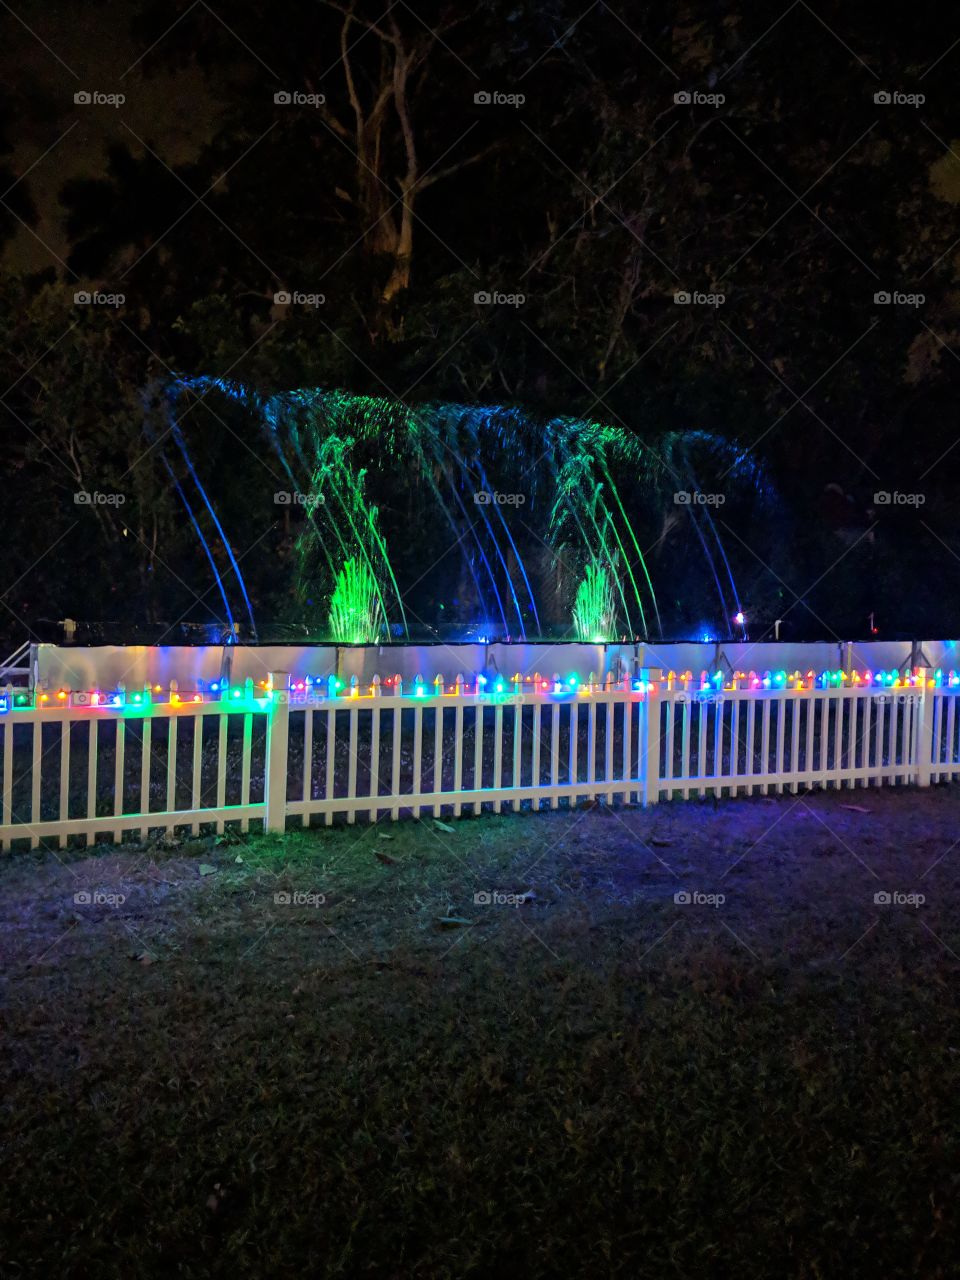 Dancing Waters/liquid fireworks at Ford & Edison Winter Estate, Fort Meyers, FL 12/2018